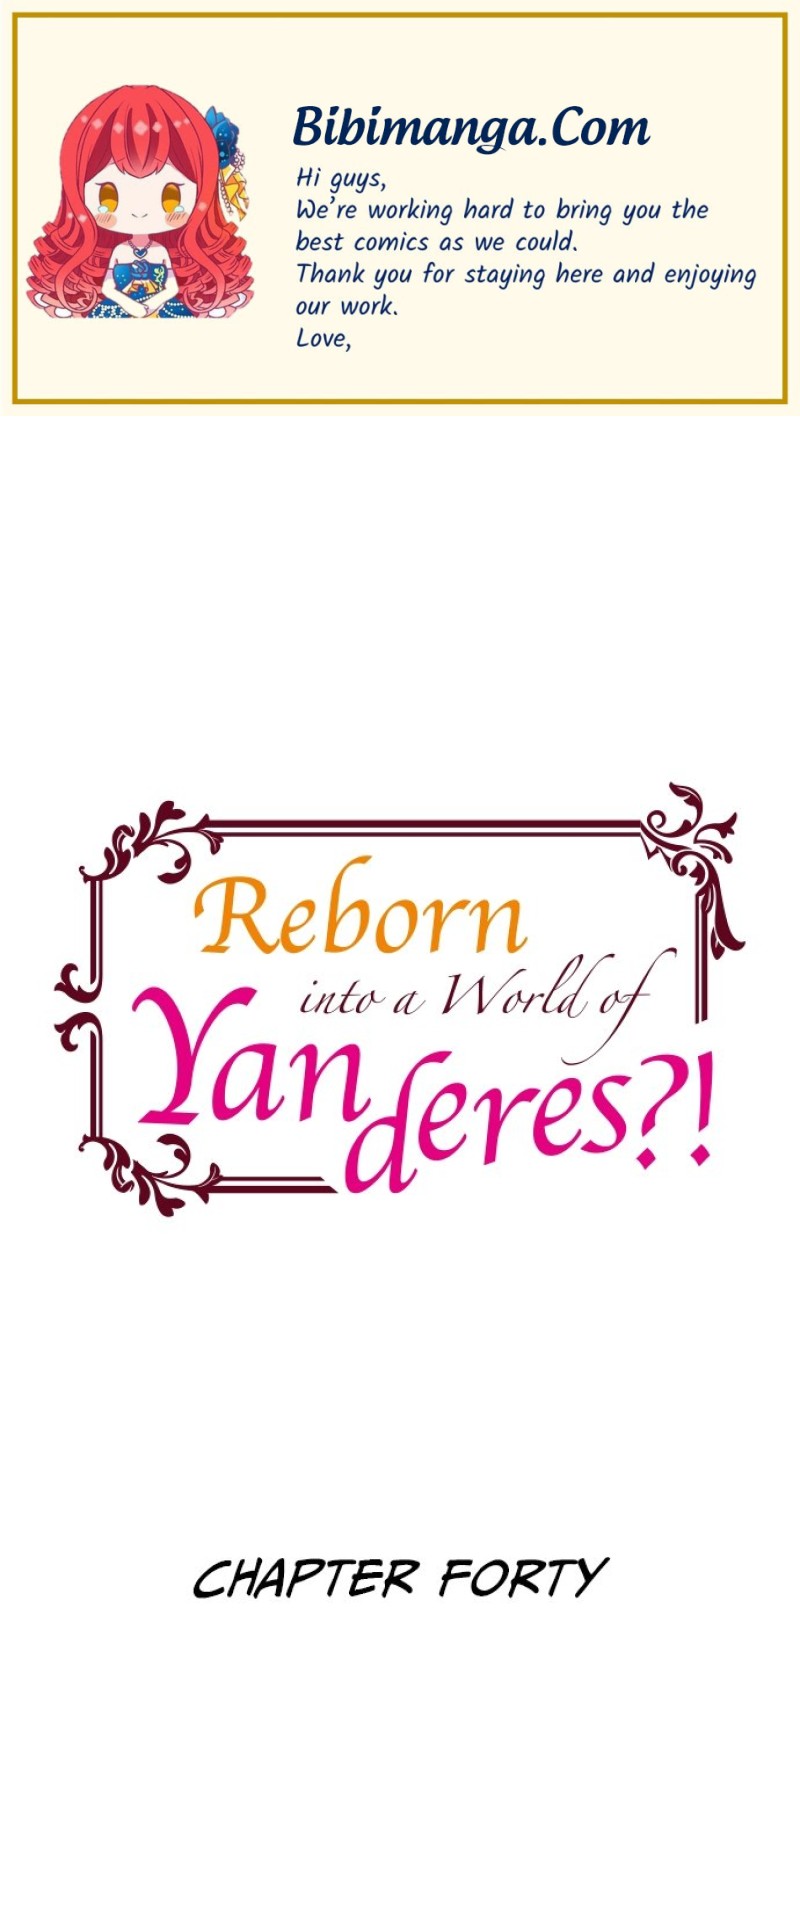 Reborn into a World of Yanderes?! chapter 40